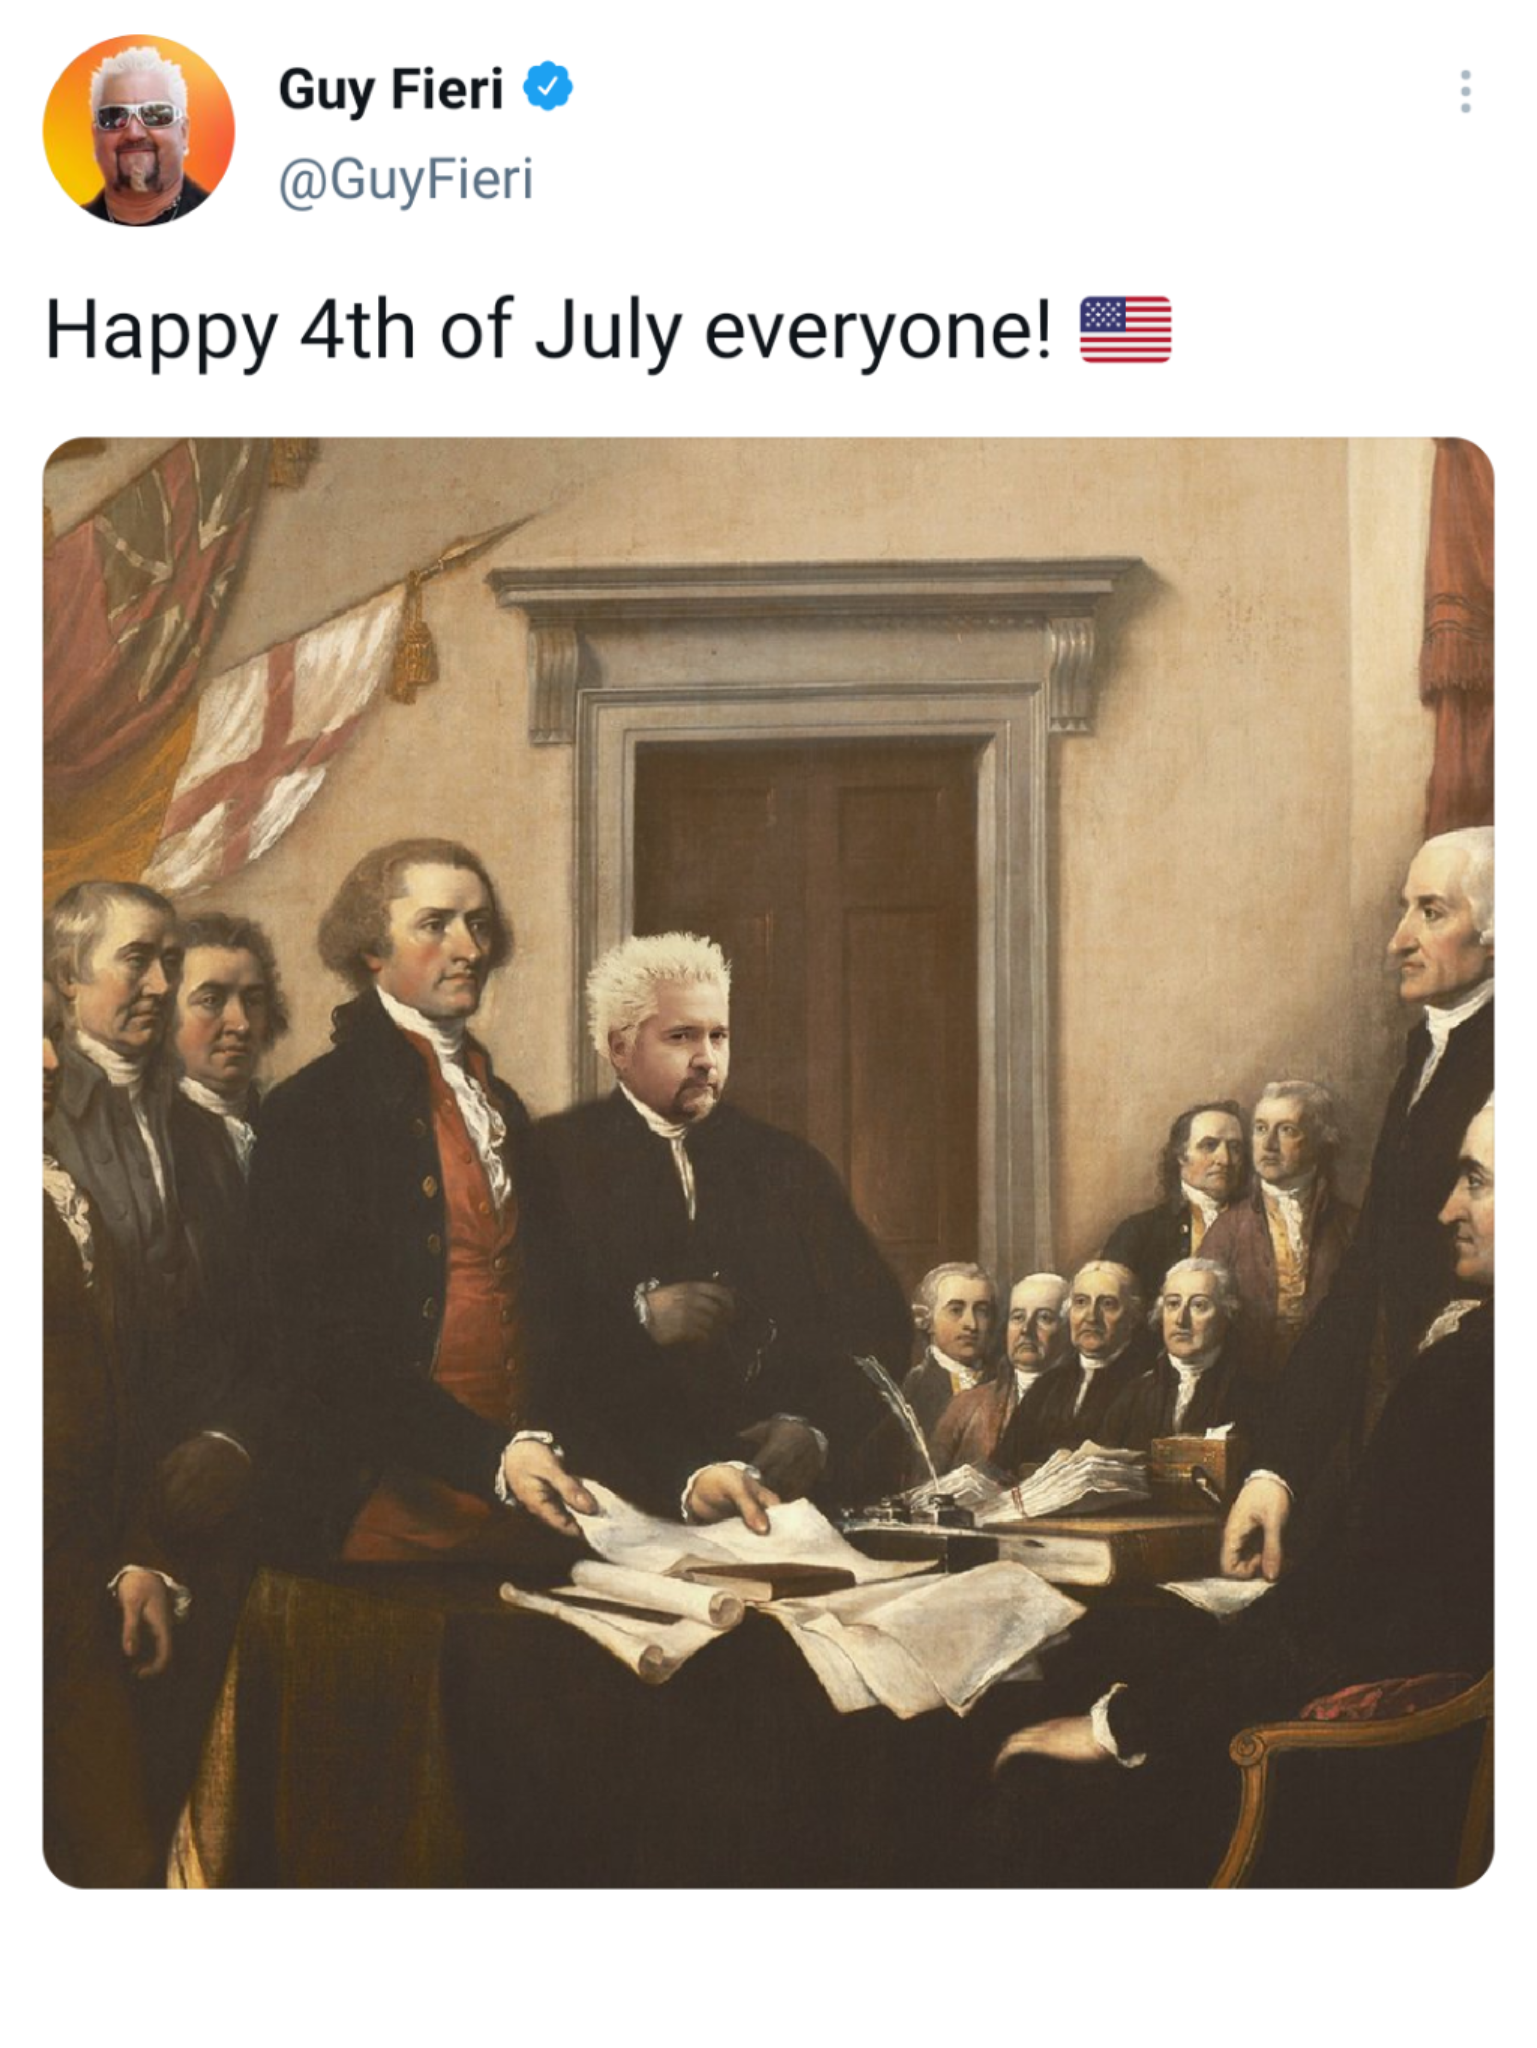 monday morning randomness - declaration of independence being signed - Guy Fieri Happy 4th of July everyone!